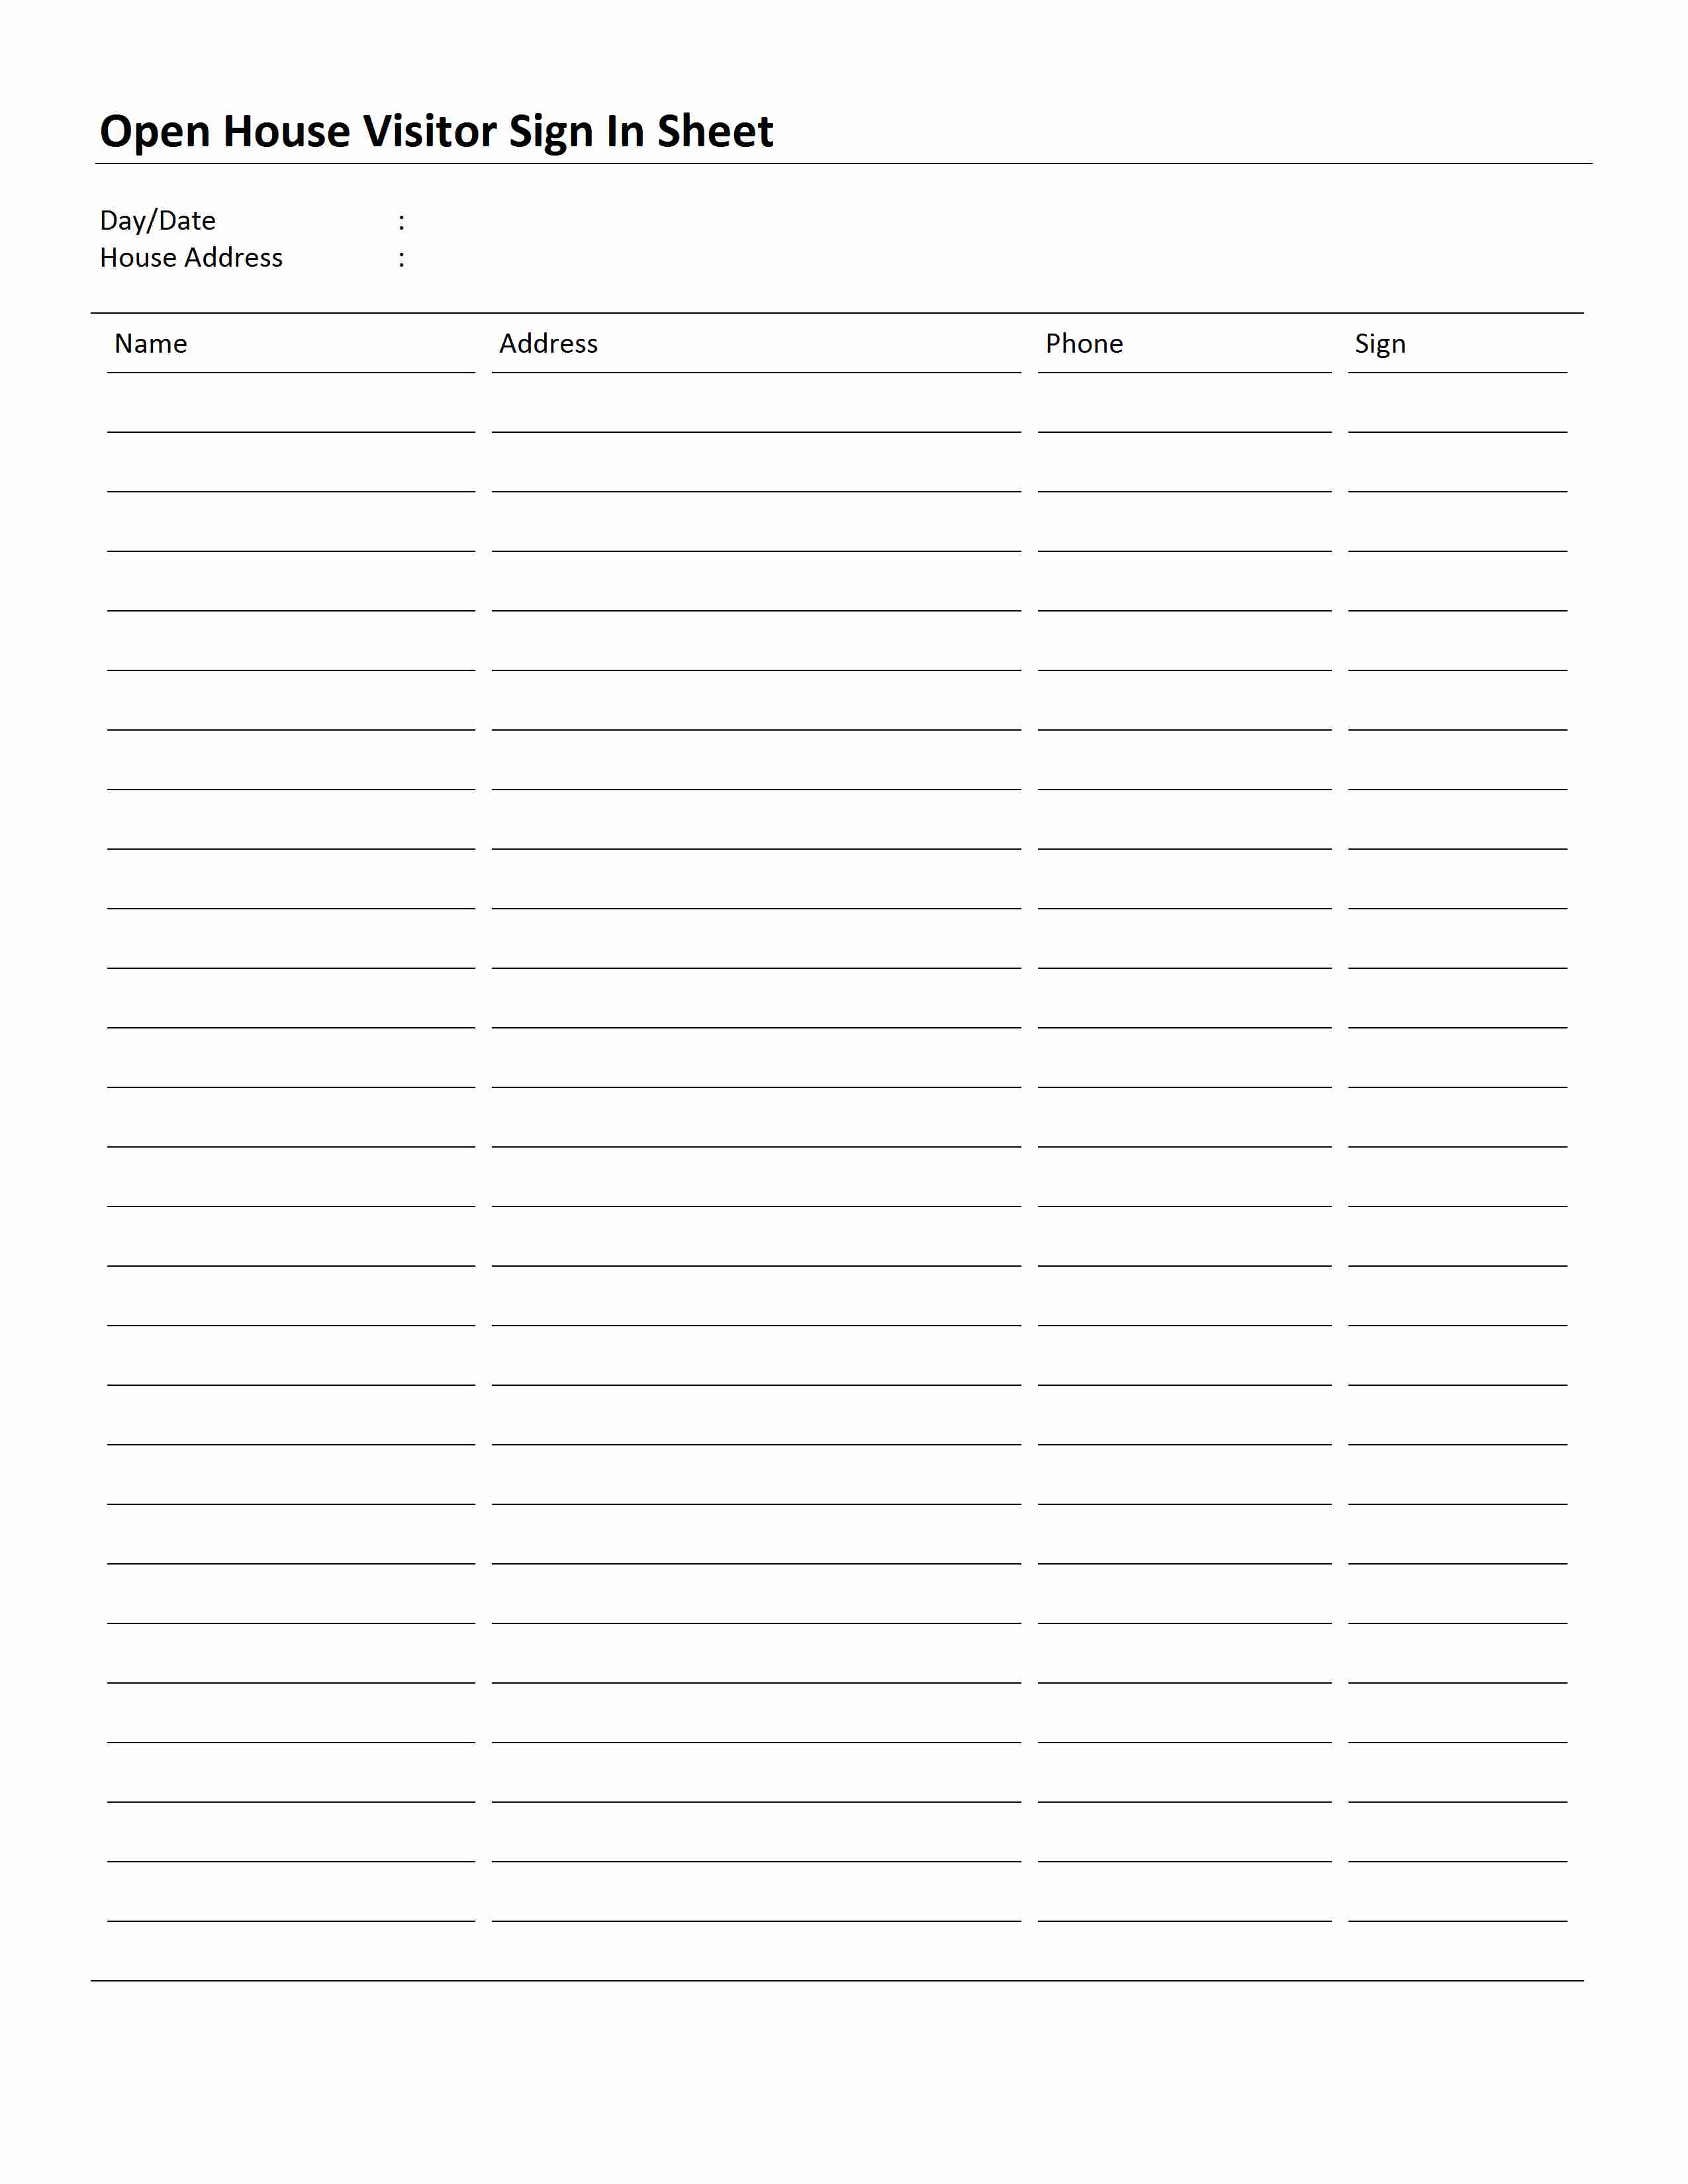 Open House Sign In Sheet Template for Word